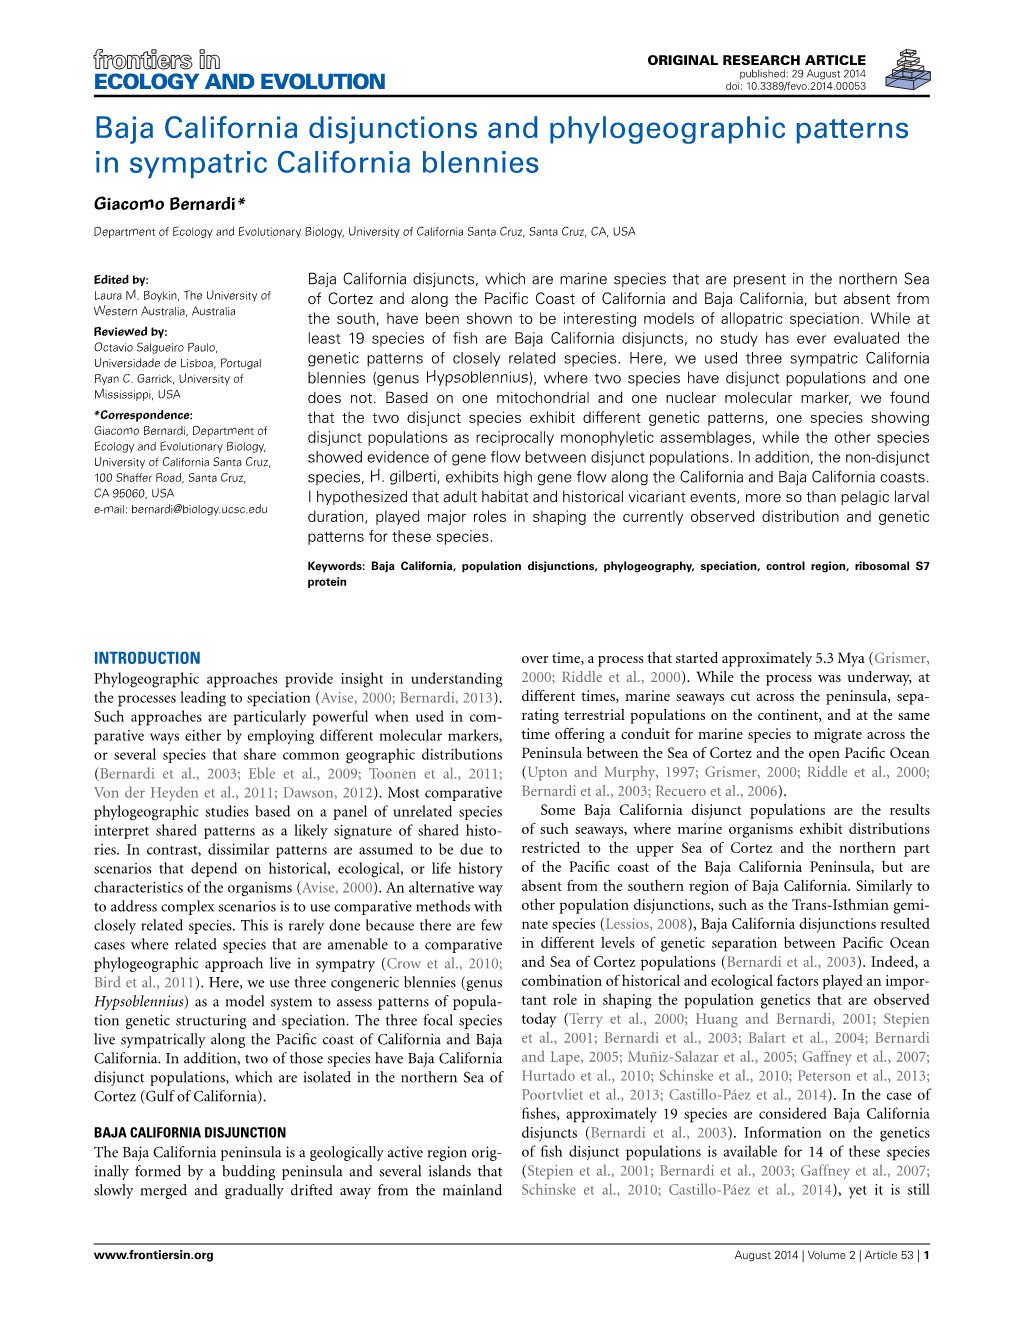 Baja California Disjunctions and Phylogeographic Patterns in Sympatric California Blennies